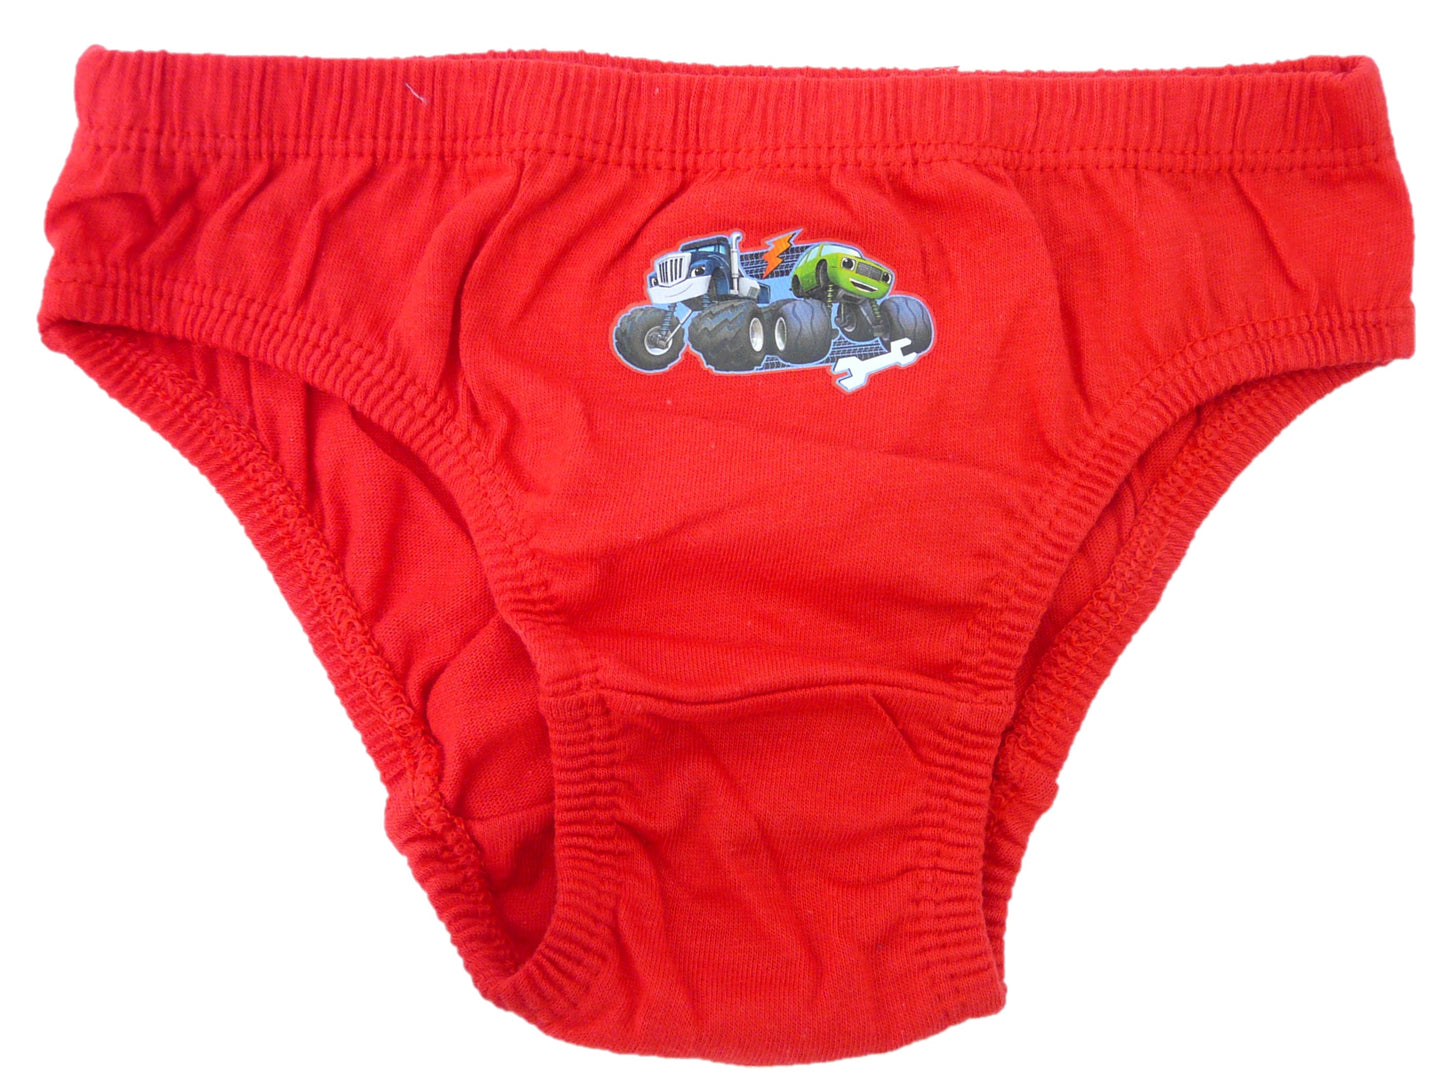 Blaze and the Monster Machines Boys 3 Pack Briefs 7-8 Years